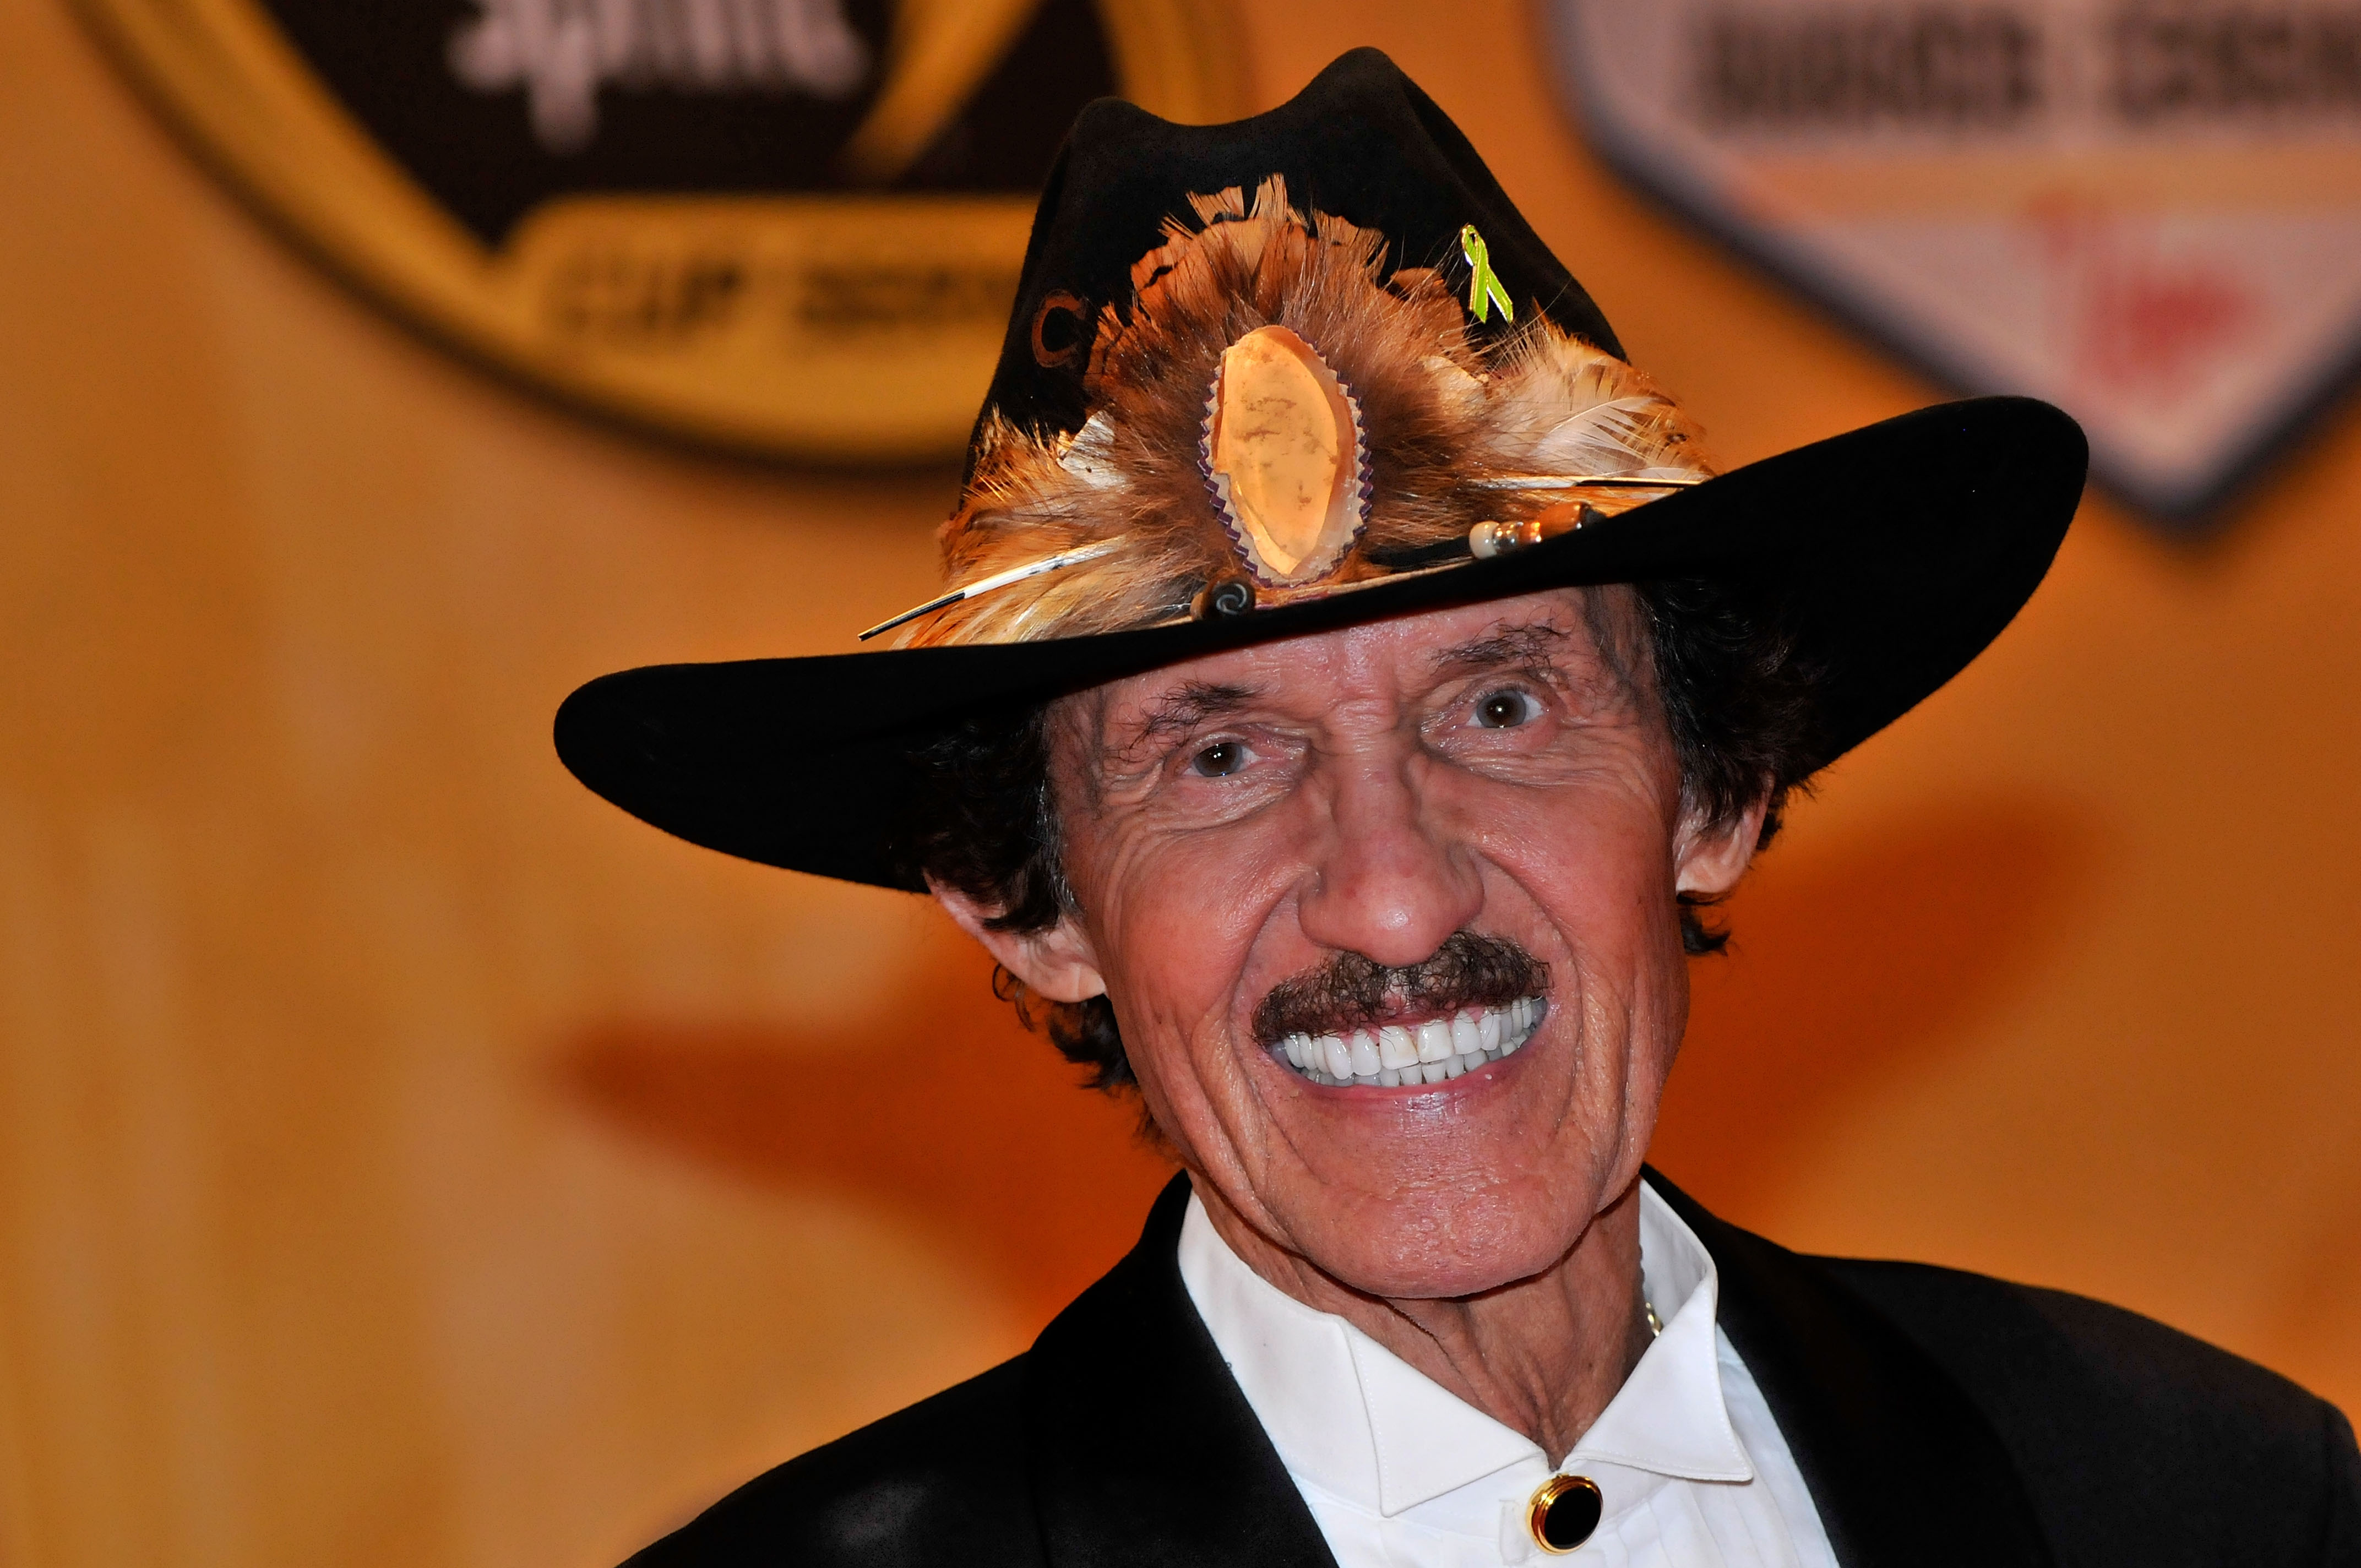 LAS VEGAS, NV - DECEMBER 03:  Team owner Richard Petty attends the NASCAR Sprint Cup Series awards banquet at the Wynn Las Vegas Hotel on December 3, 2010 in Las Vegas, Nevada.  (Photo by David Becker/Getty Images for NASCAR)